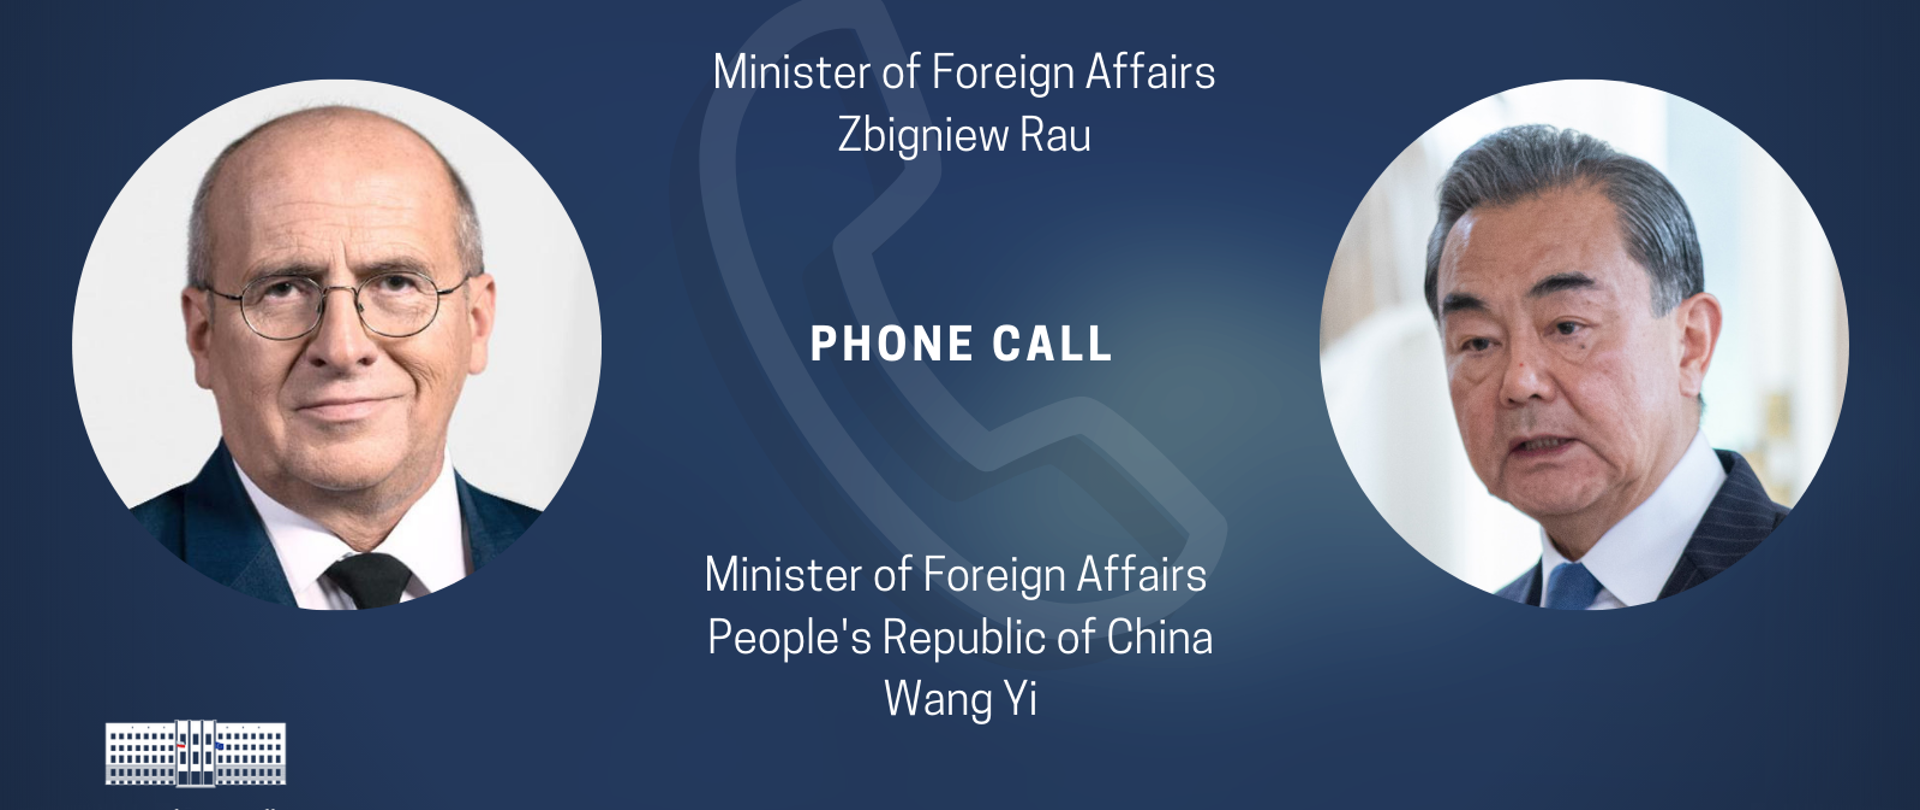 Minister Zbigniew Rau and Minister of Foreign Affairs Wang Yi